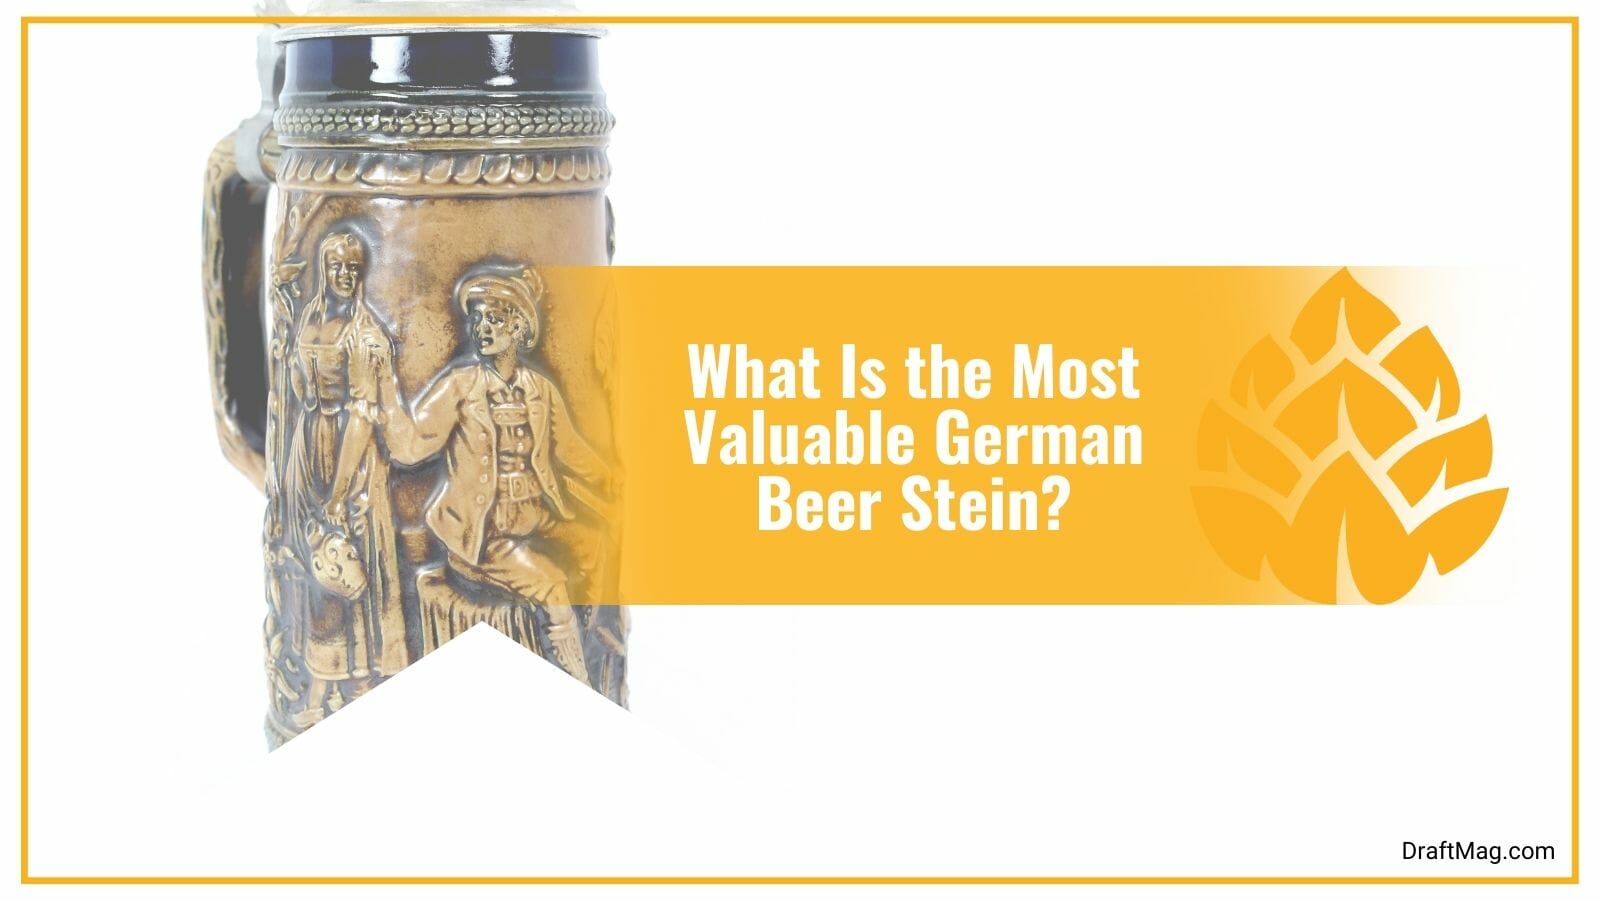 What Is the Most Valuable German Beer Stein